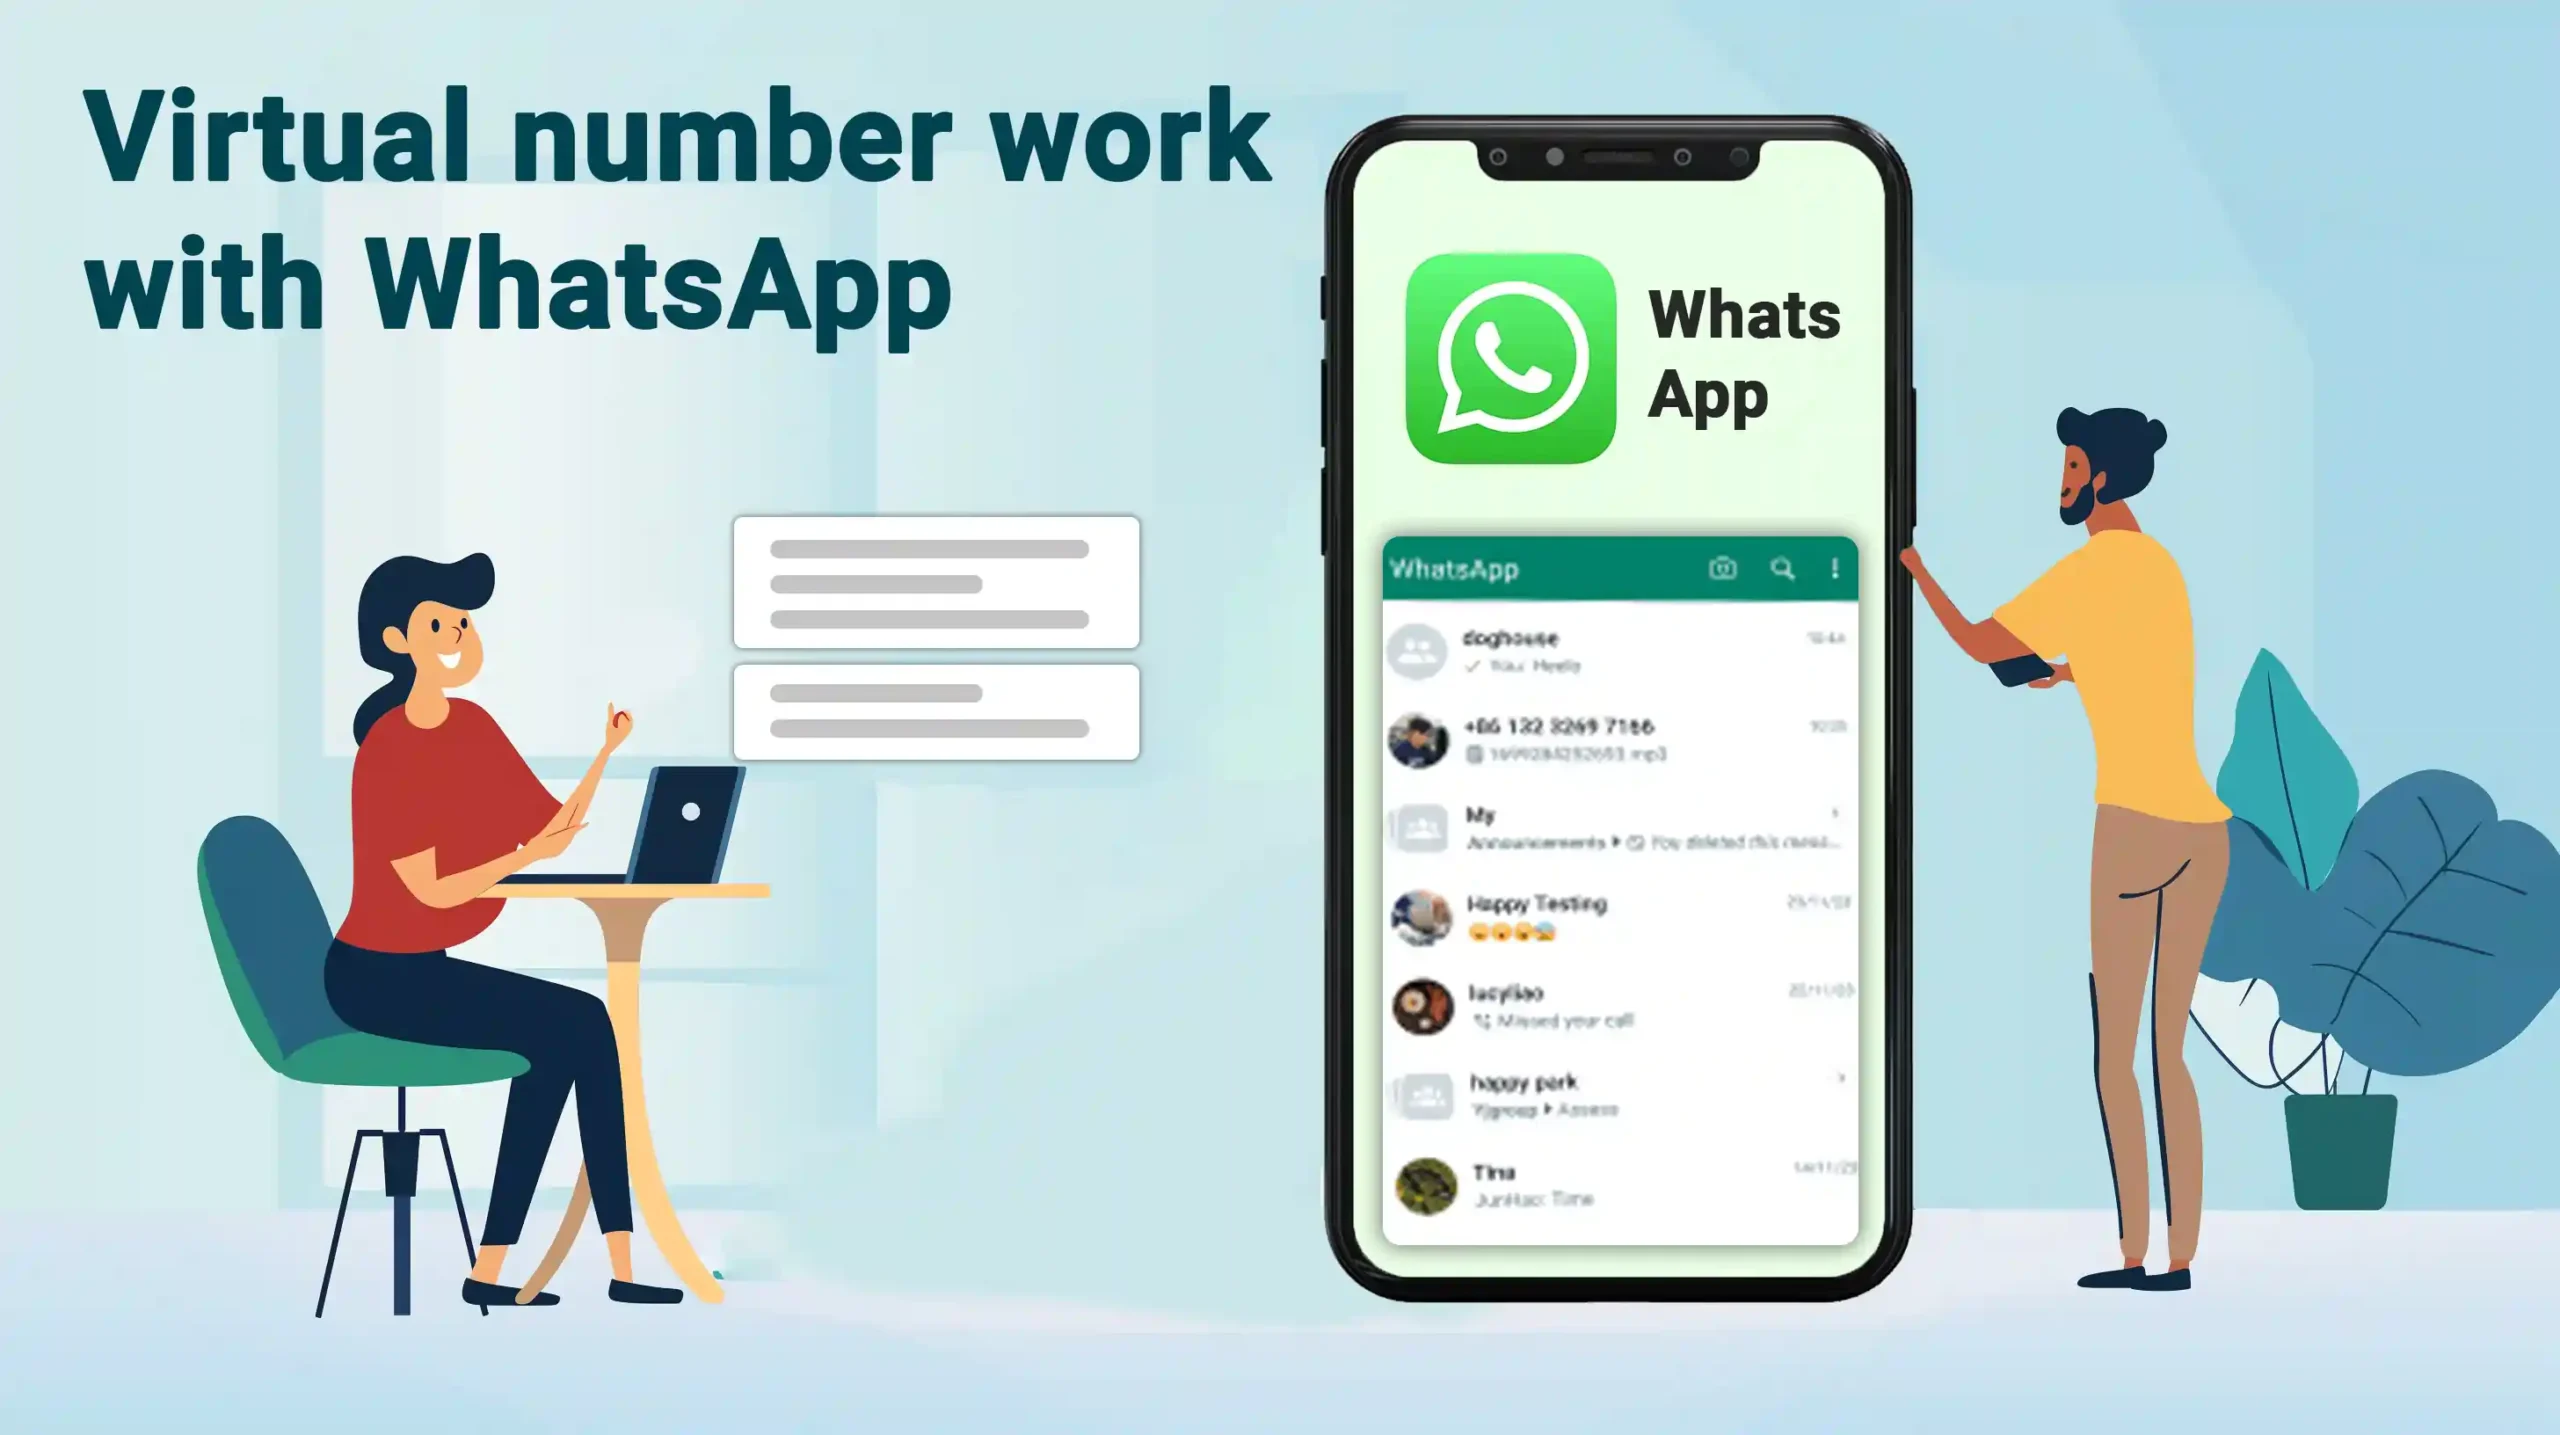 How does a virtual number work with WhatsApp?